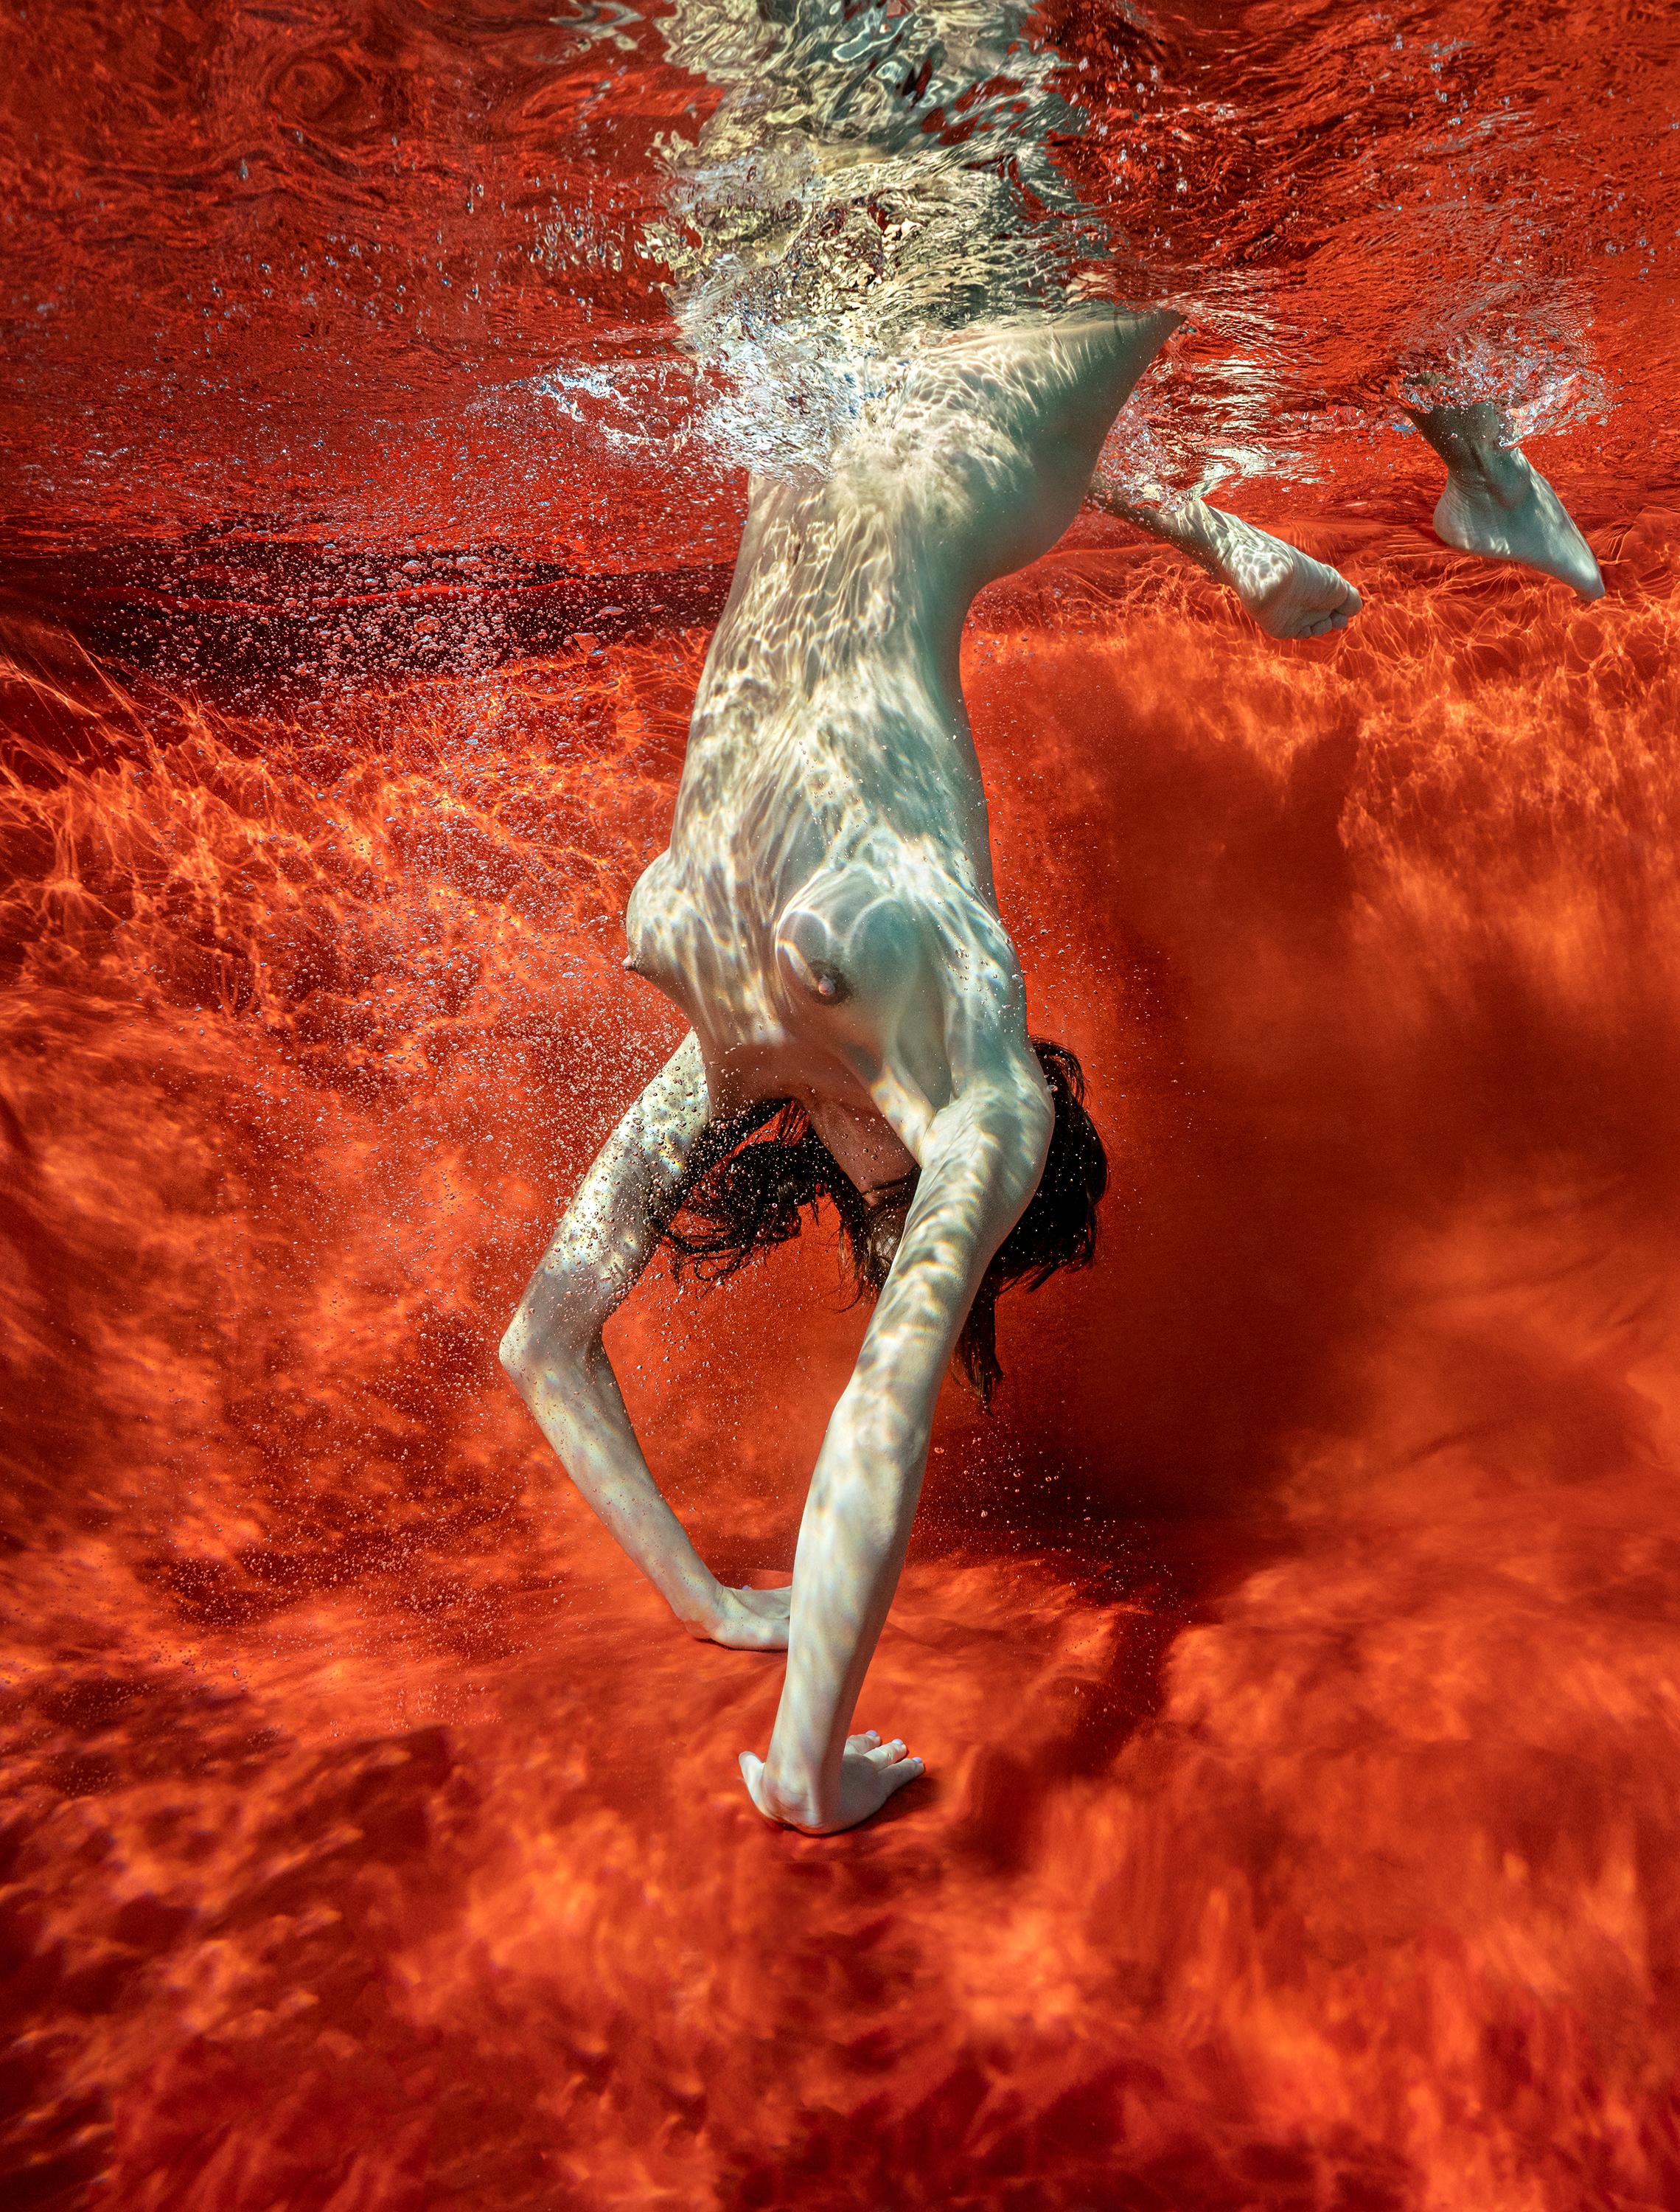 Alex Sher Nude Photograph - Blood and Milk VIII - underwater nude photograph - archival pigment print 46x35"